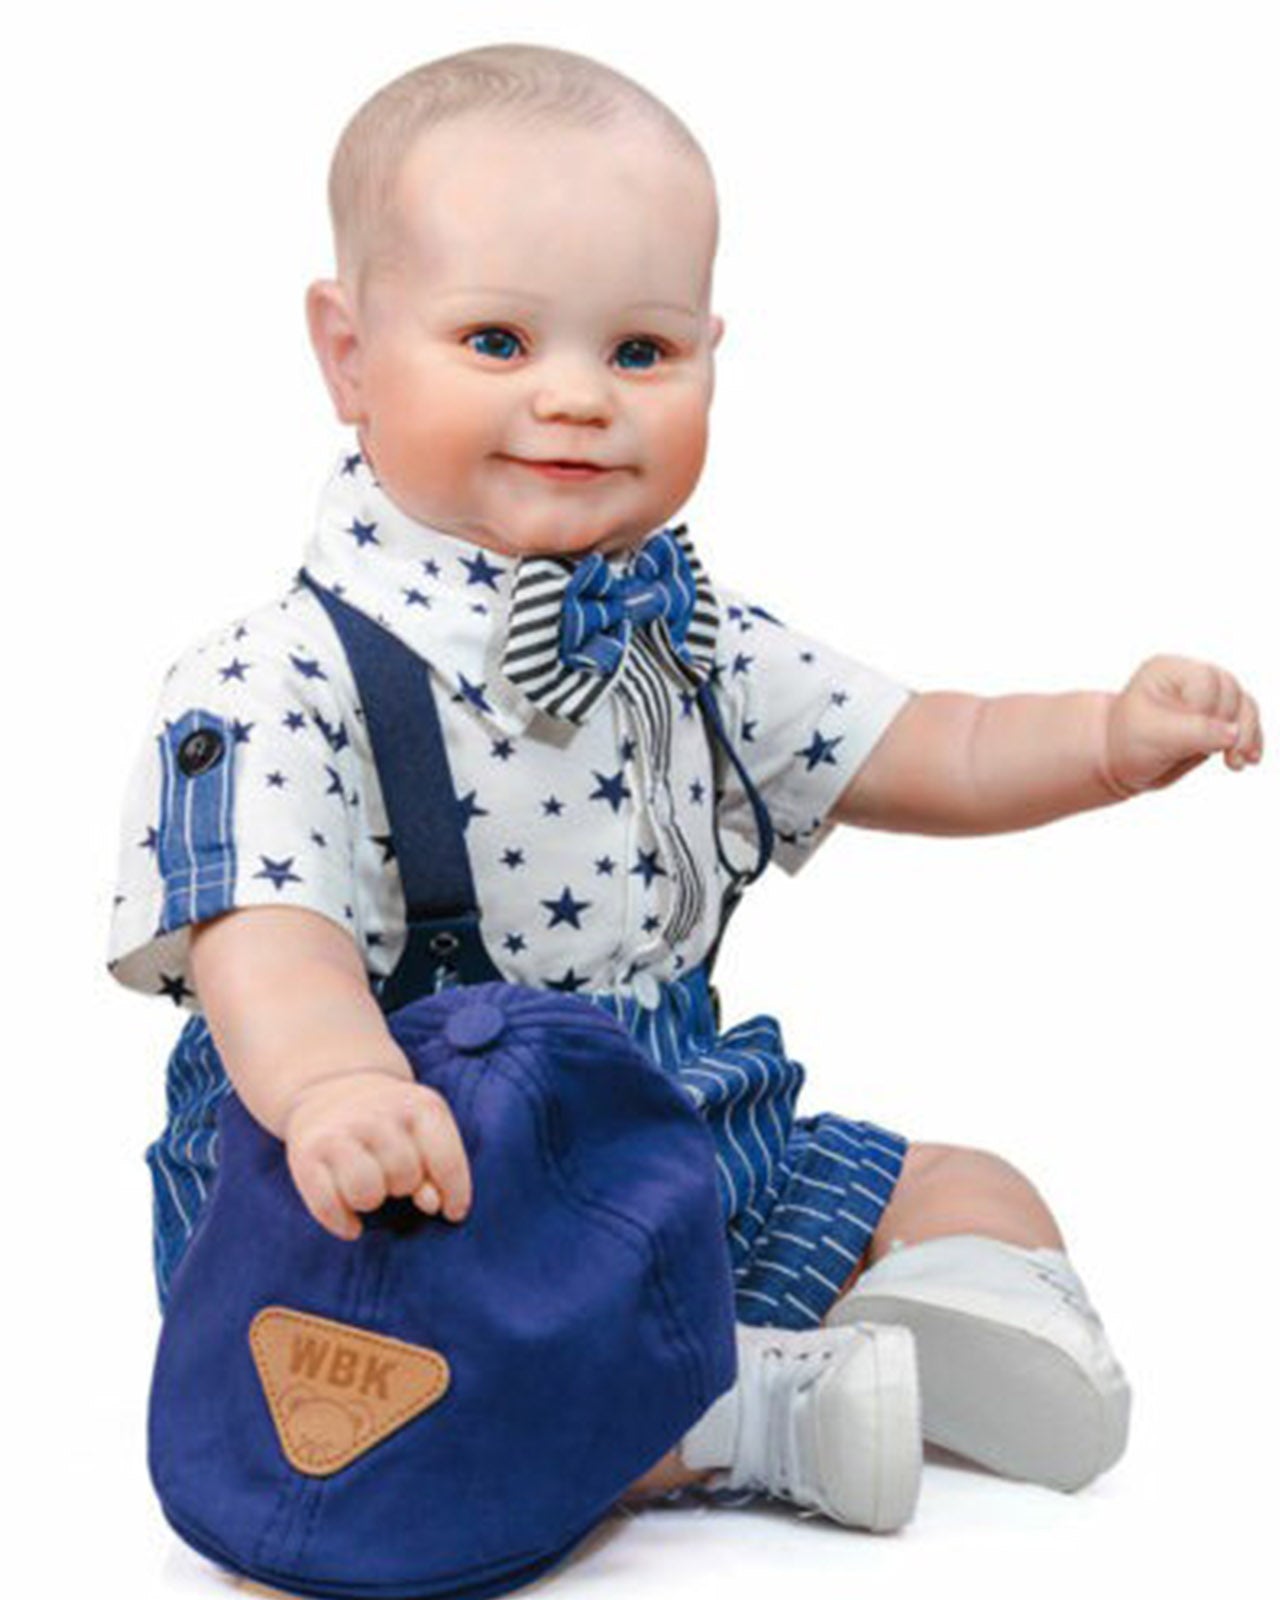 Jarvis - 24" Reborn Baby Dolls Handmade Vinyl Silicone Toddlers Boy with Weighted Cloth Body